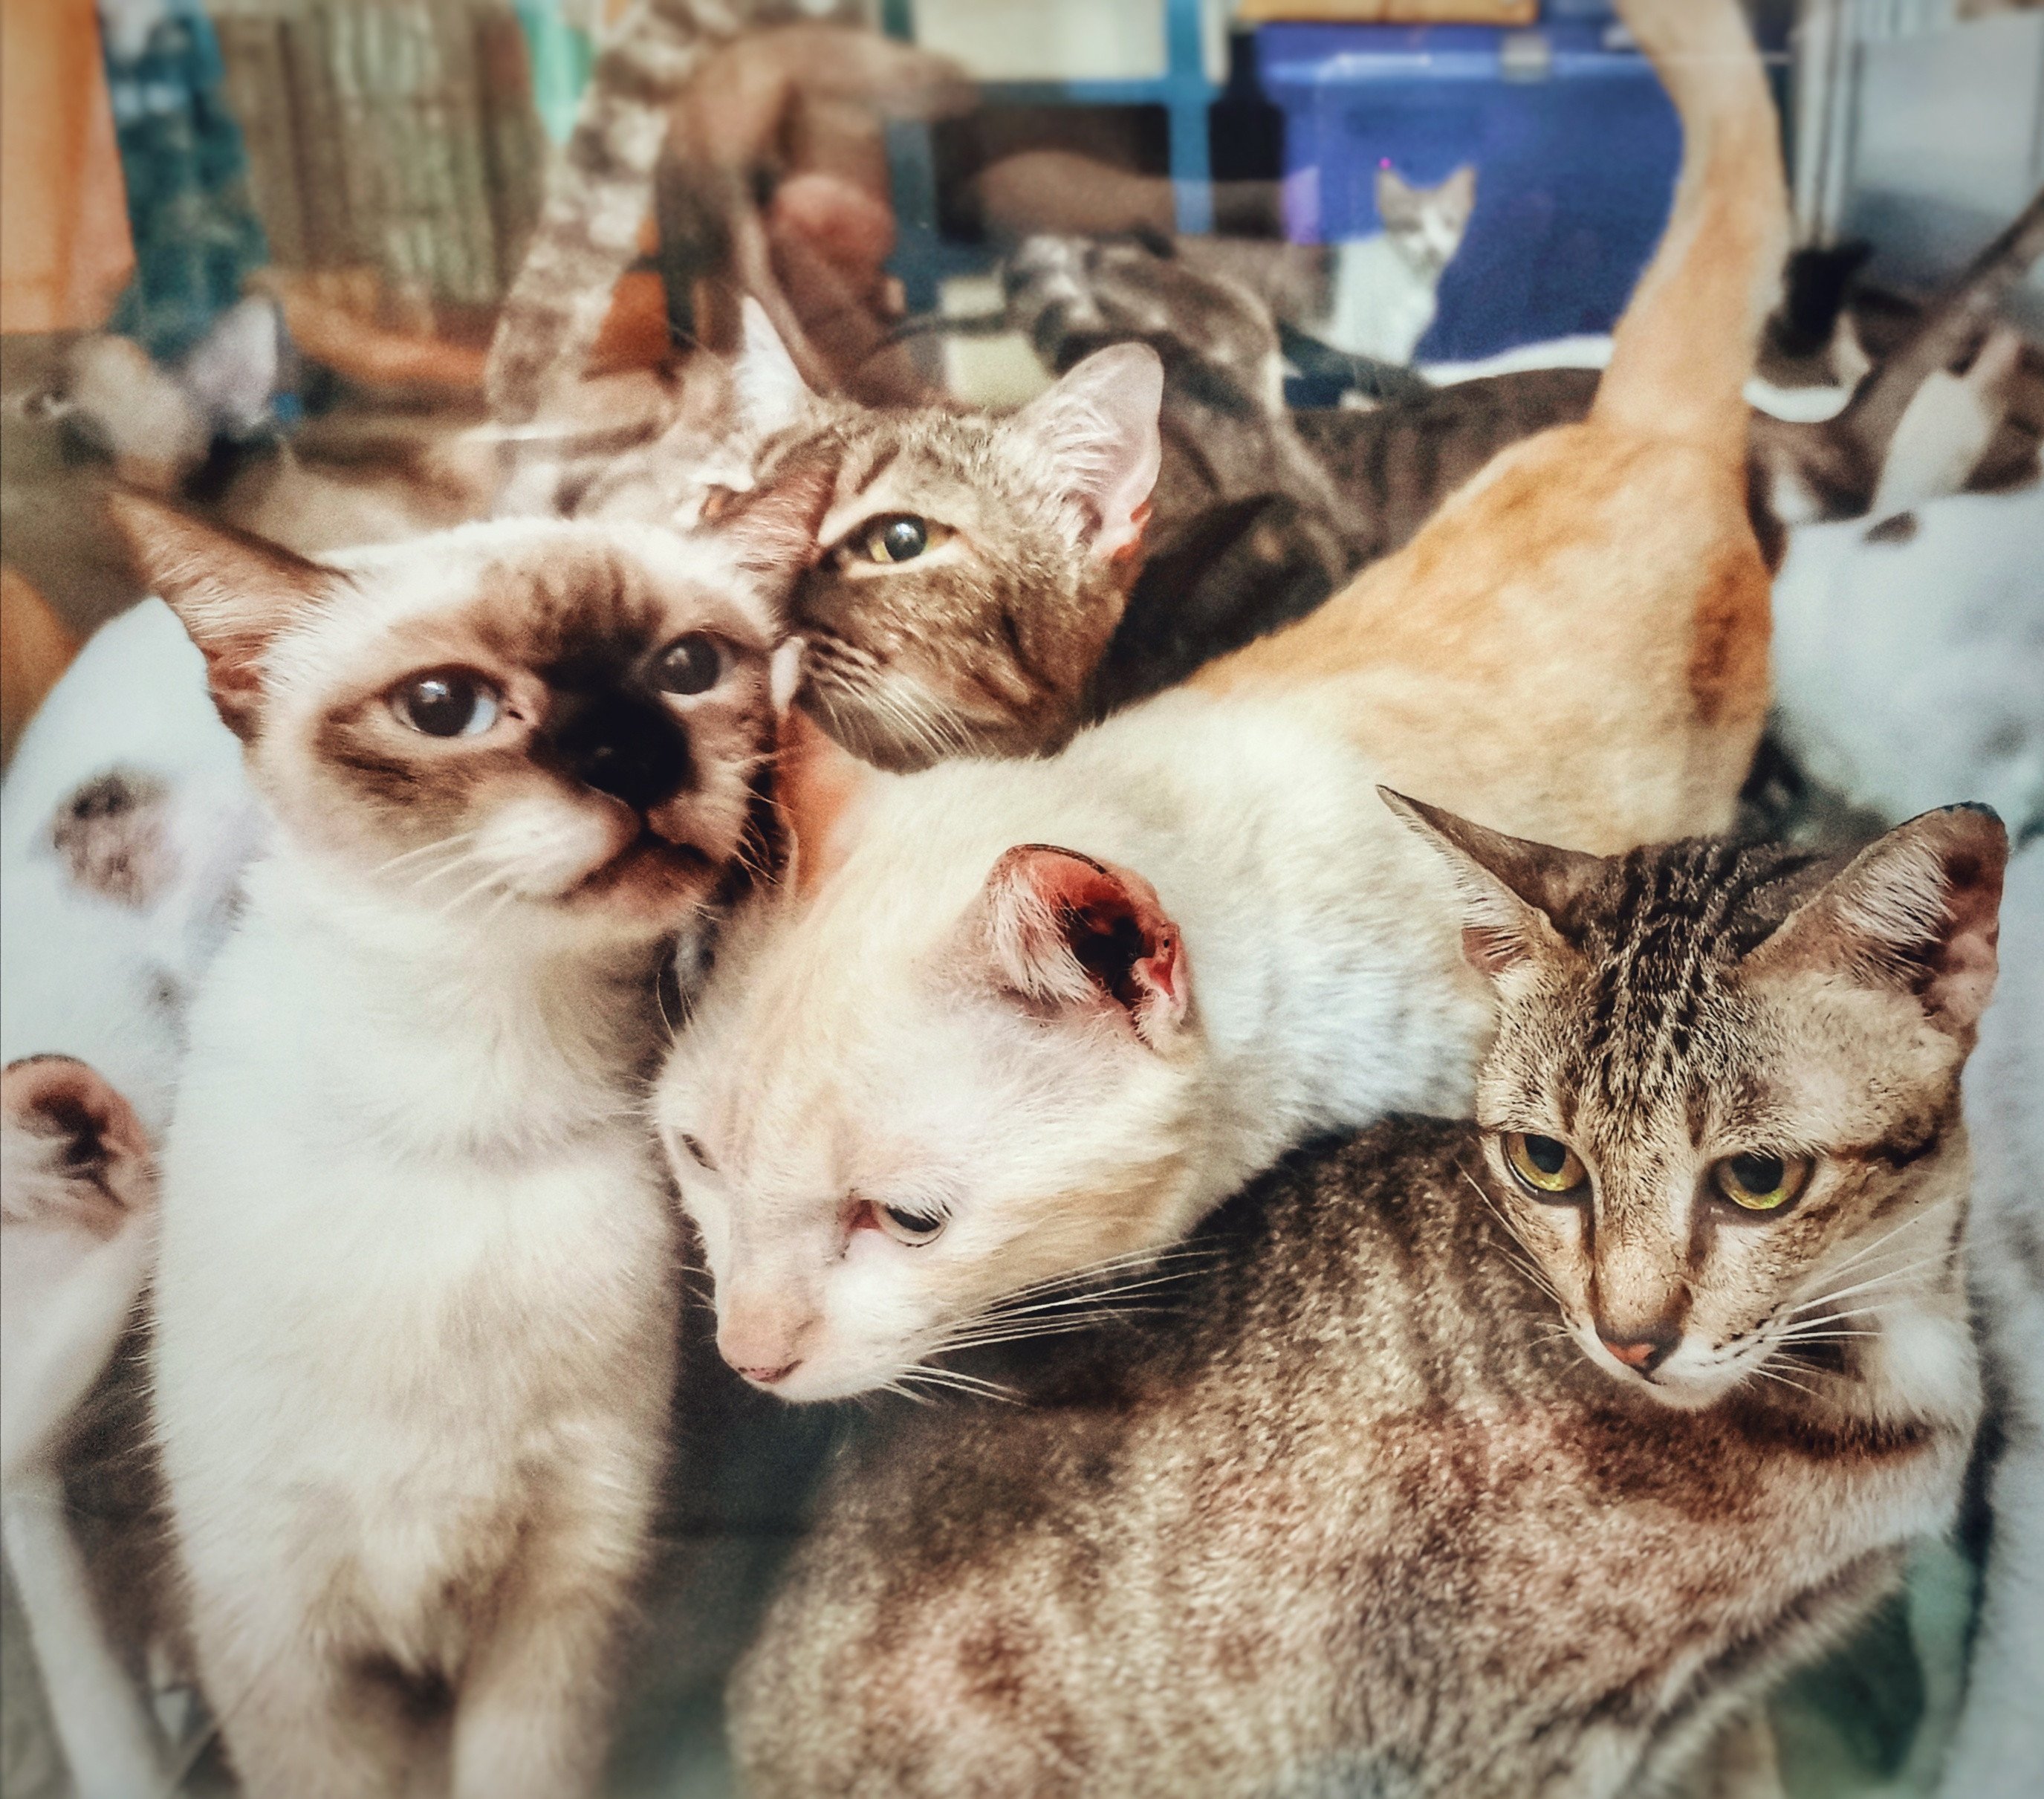 The couple lived with 159 cats and seven dogs in a flat in Nice, France. Stock photo: Shutterstock